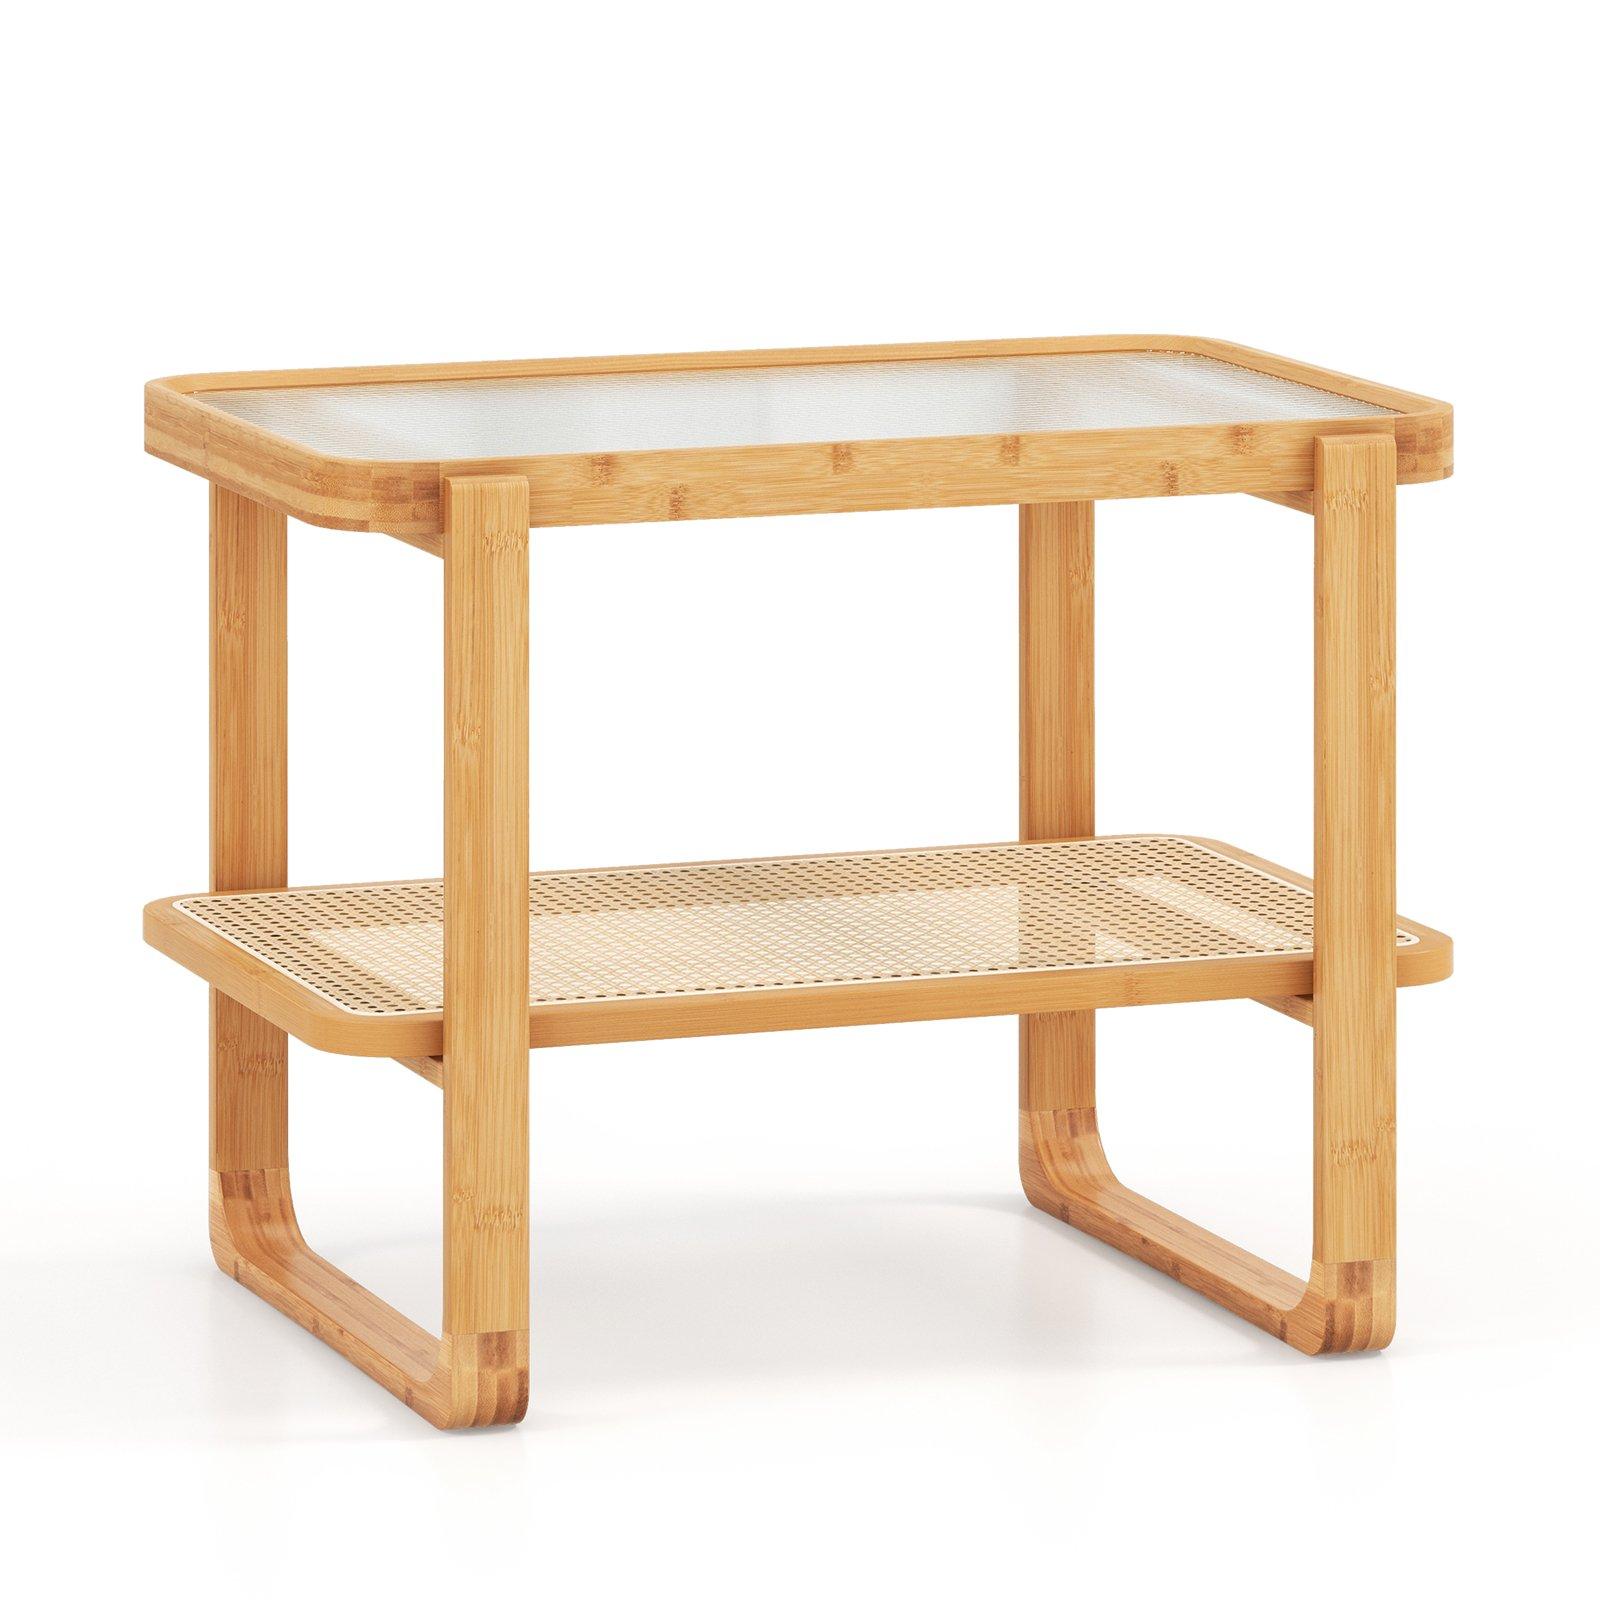 Bamboo Side Table w/ Rattan Shelf 2-tier Glass Top End Table, Home Rectangular Sofa Side Accent Tabl